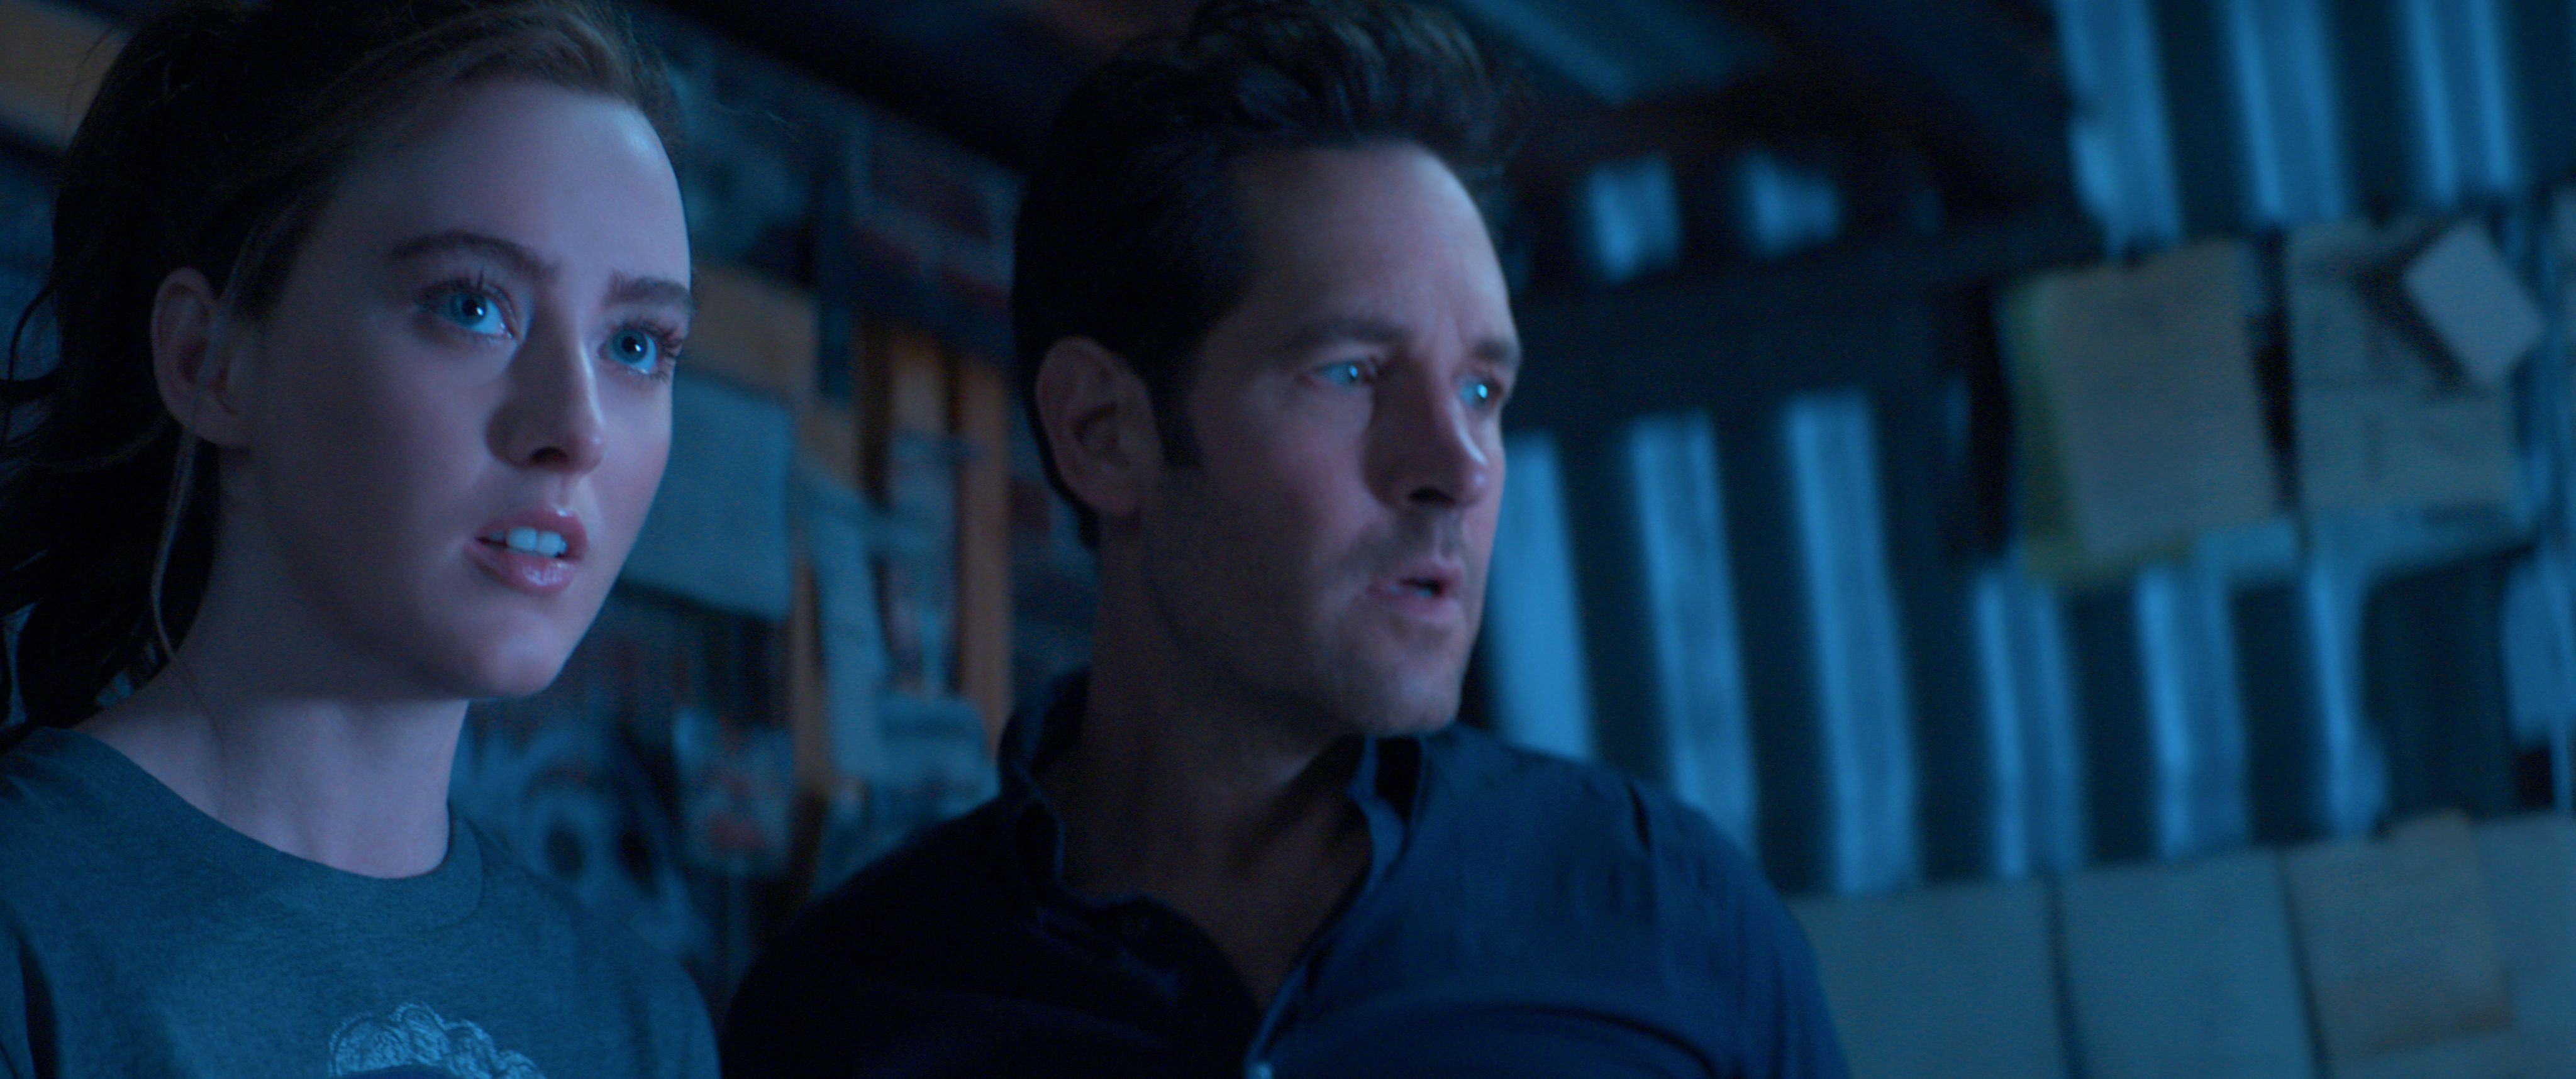 Ant-Man 3 Trailer Imminent After Teases from Disney: When Will It